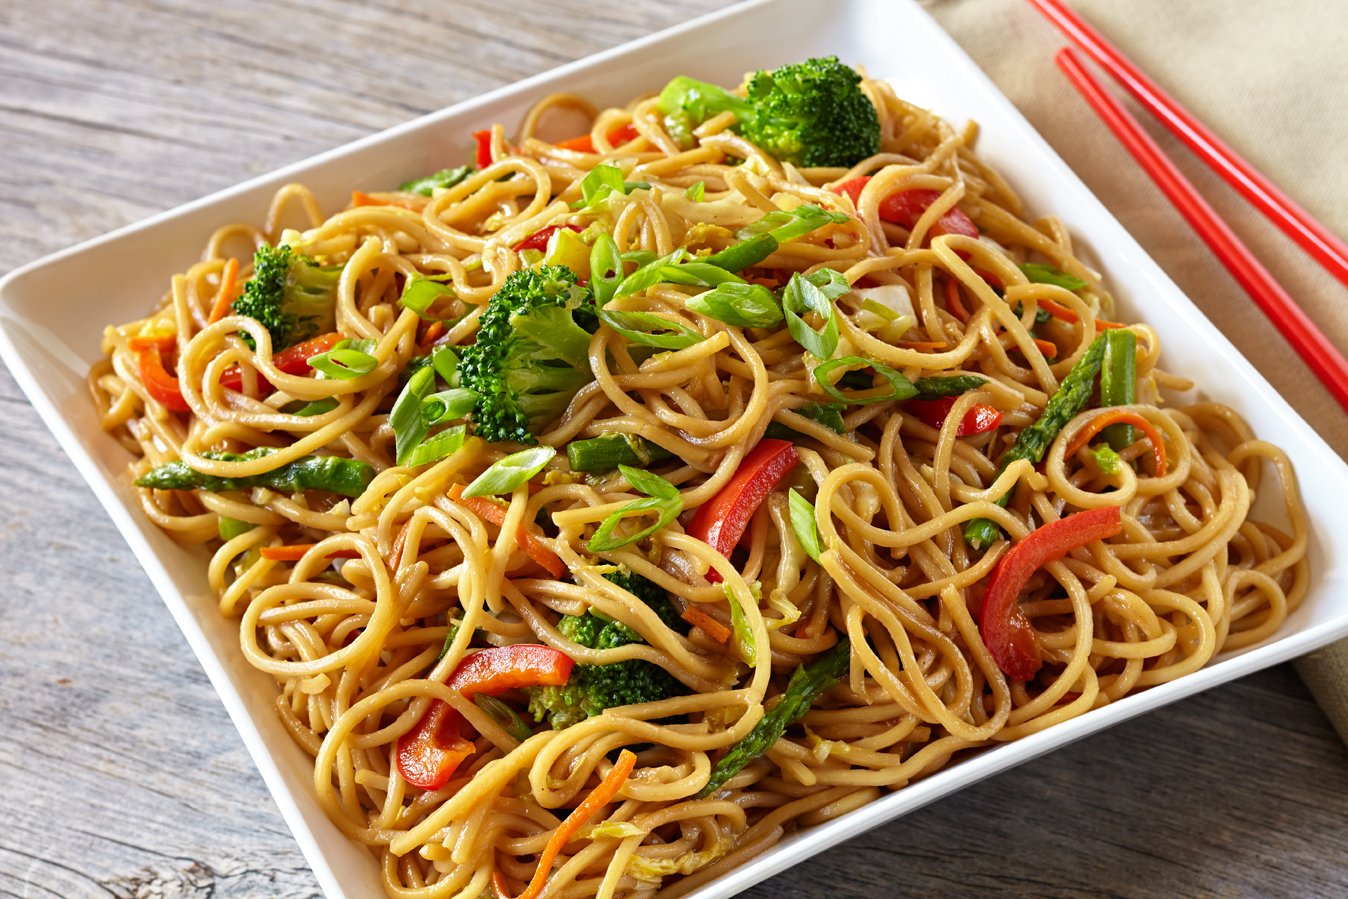 Japanese Noodles - dry or fresh?